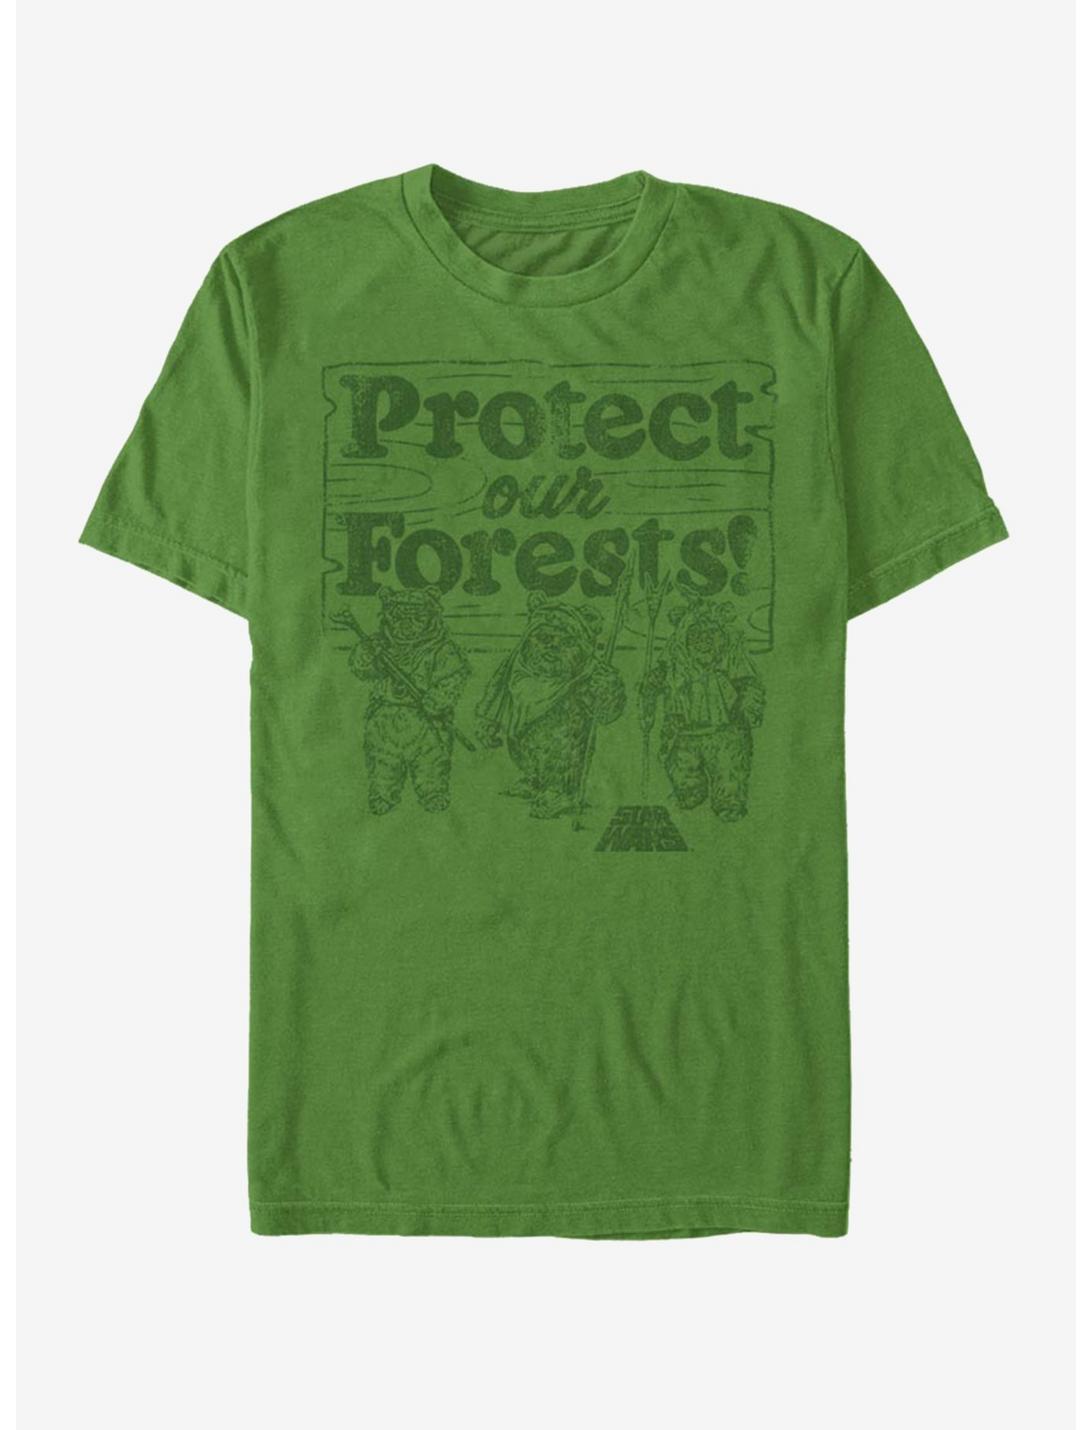 Star Wars Protect Our Forests T-Shirt, KELLY, hi-res